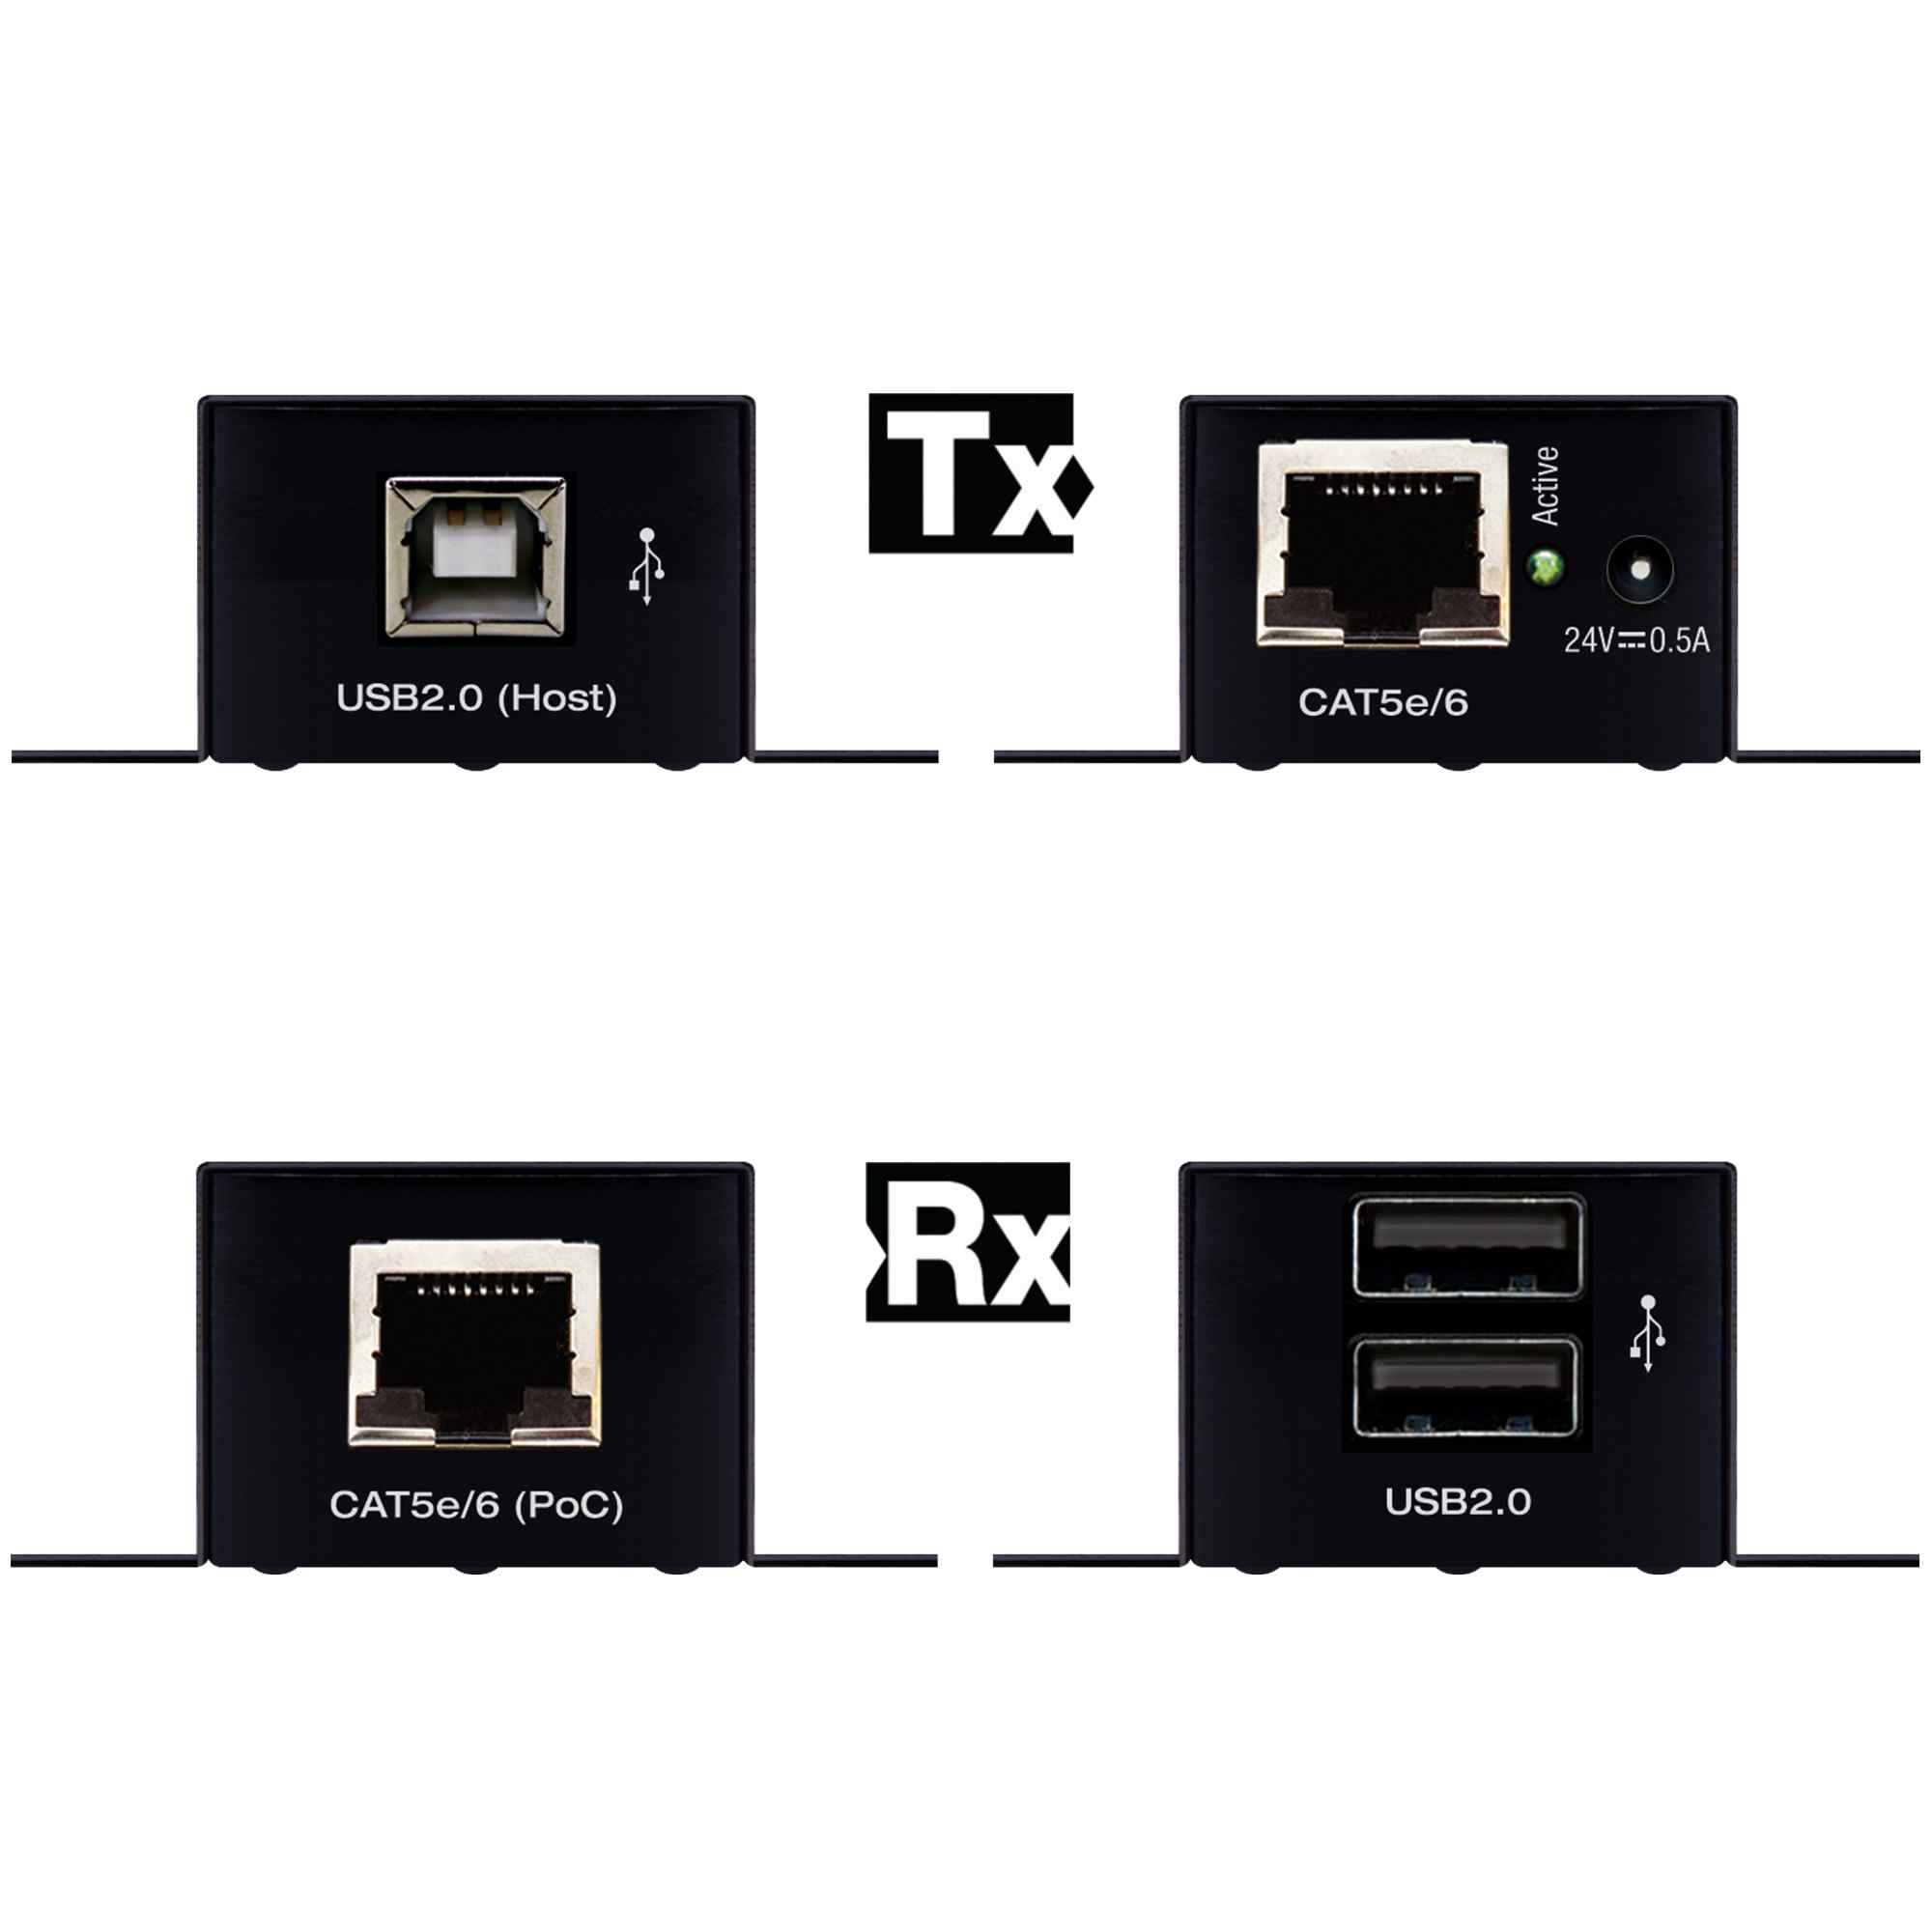 Thumbnail of KD Tx and Rx usb cat5 extender front and rear